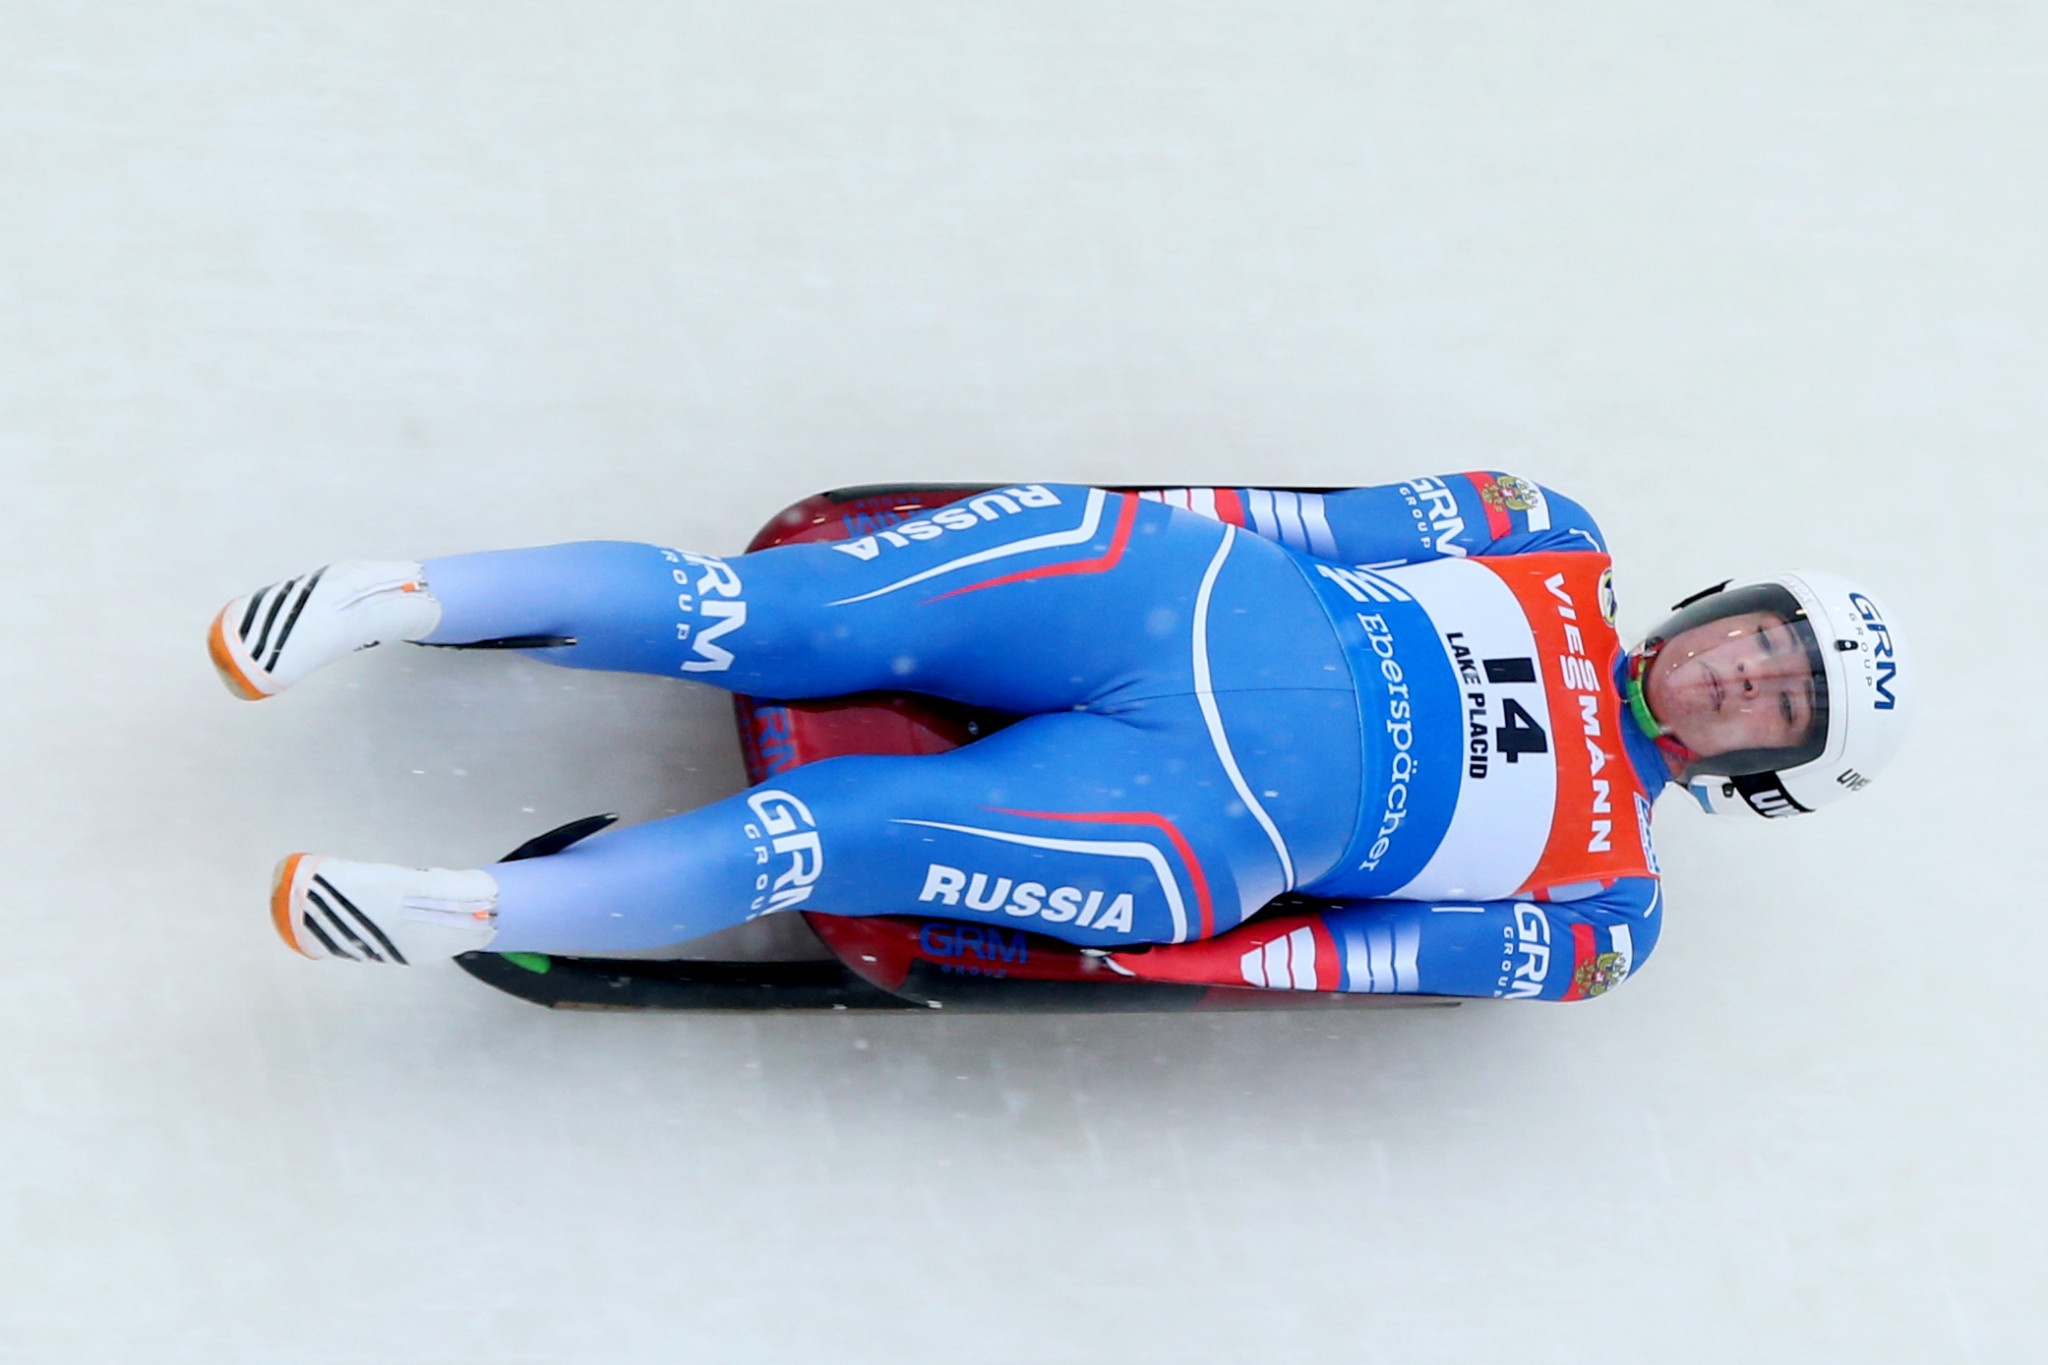 Ivanova and Taubitz to continue FIL World Cup duel in Oberhof